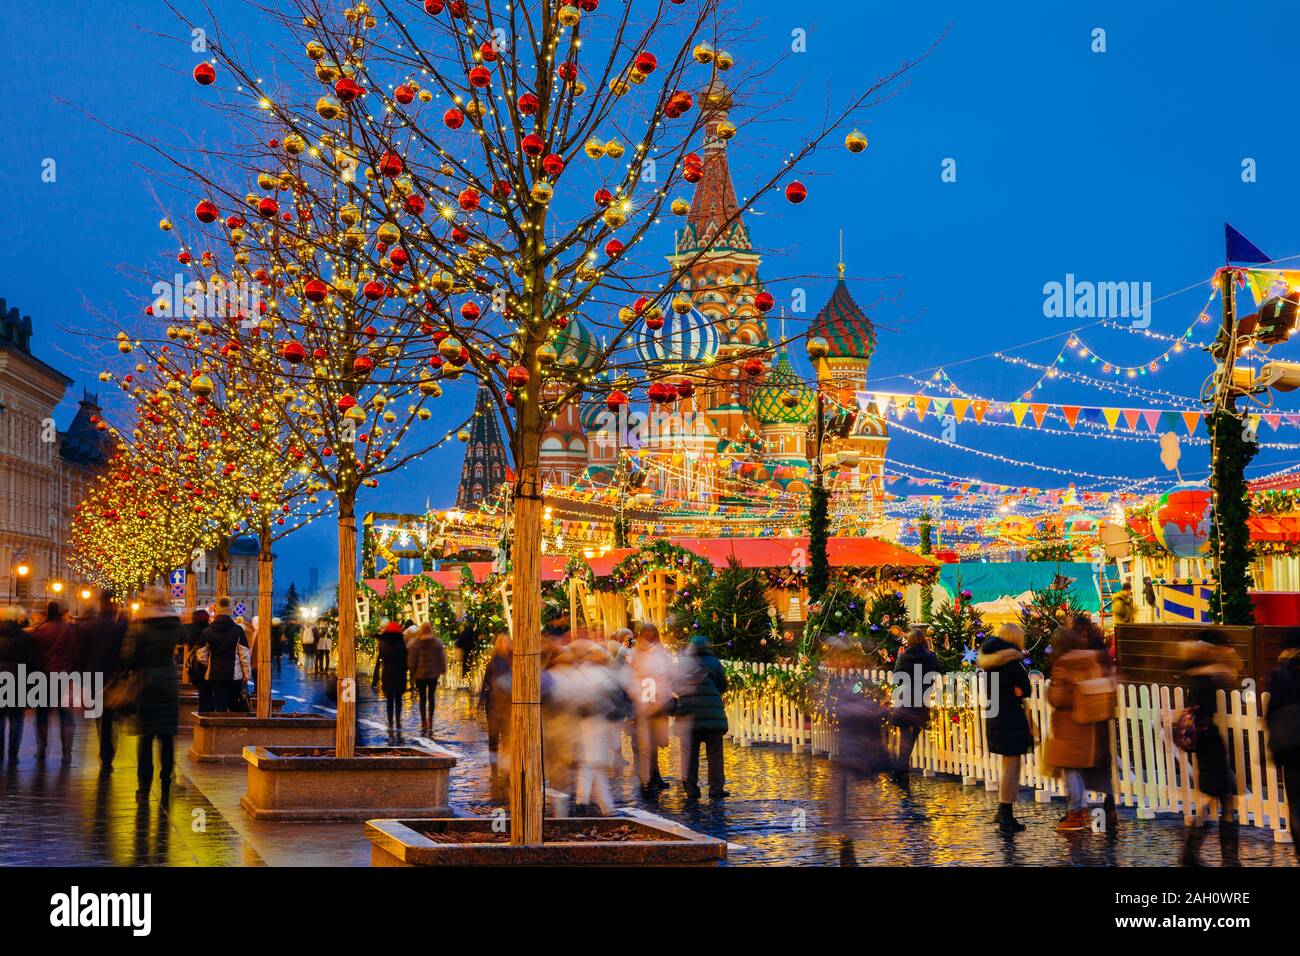 Christmas Market on the Red Square with Saint Basil's Cathedral on the background, Moscow, Russia Stock Photo